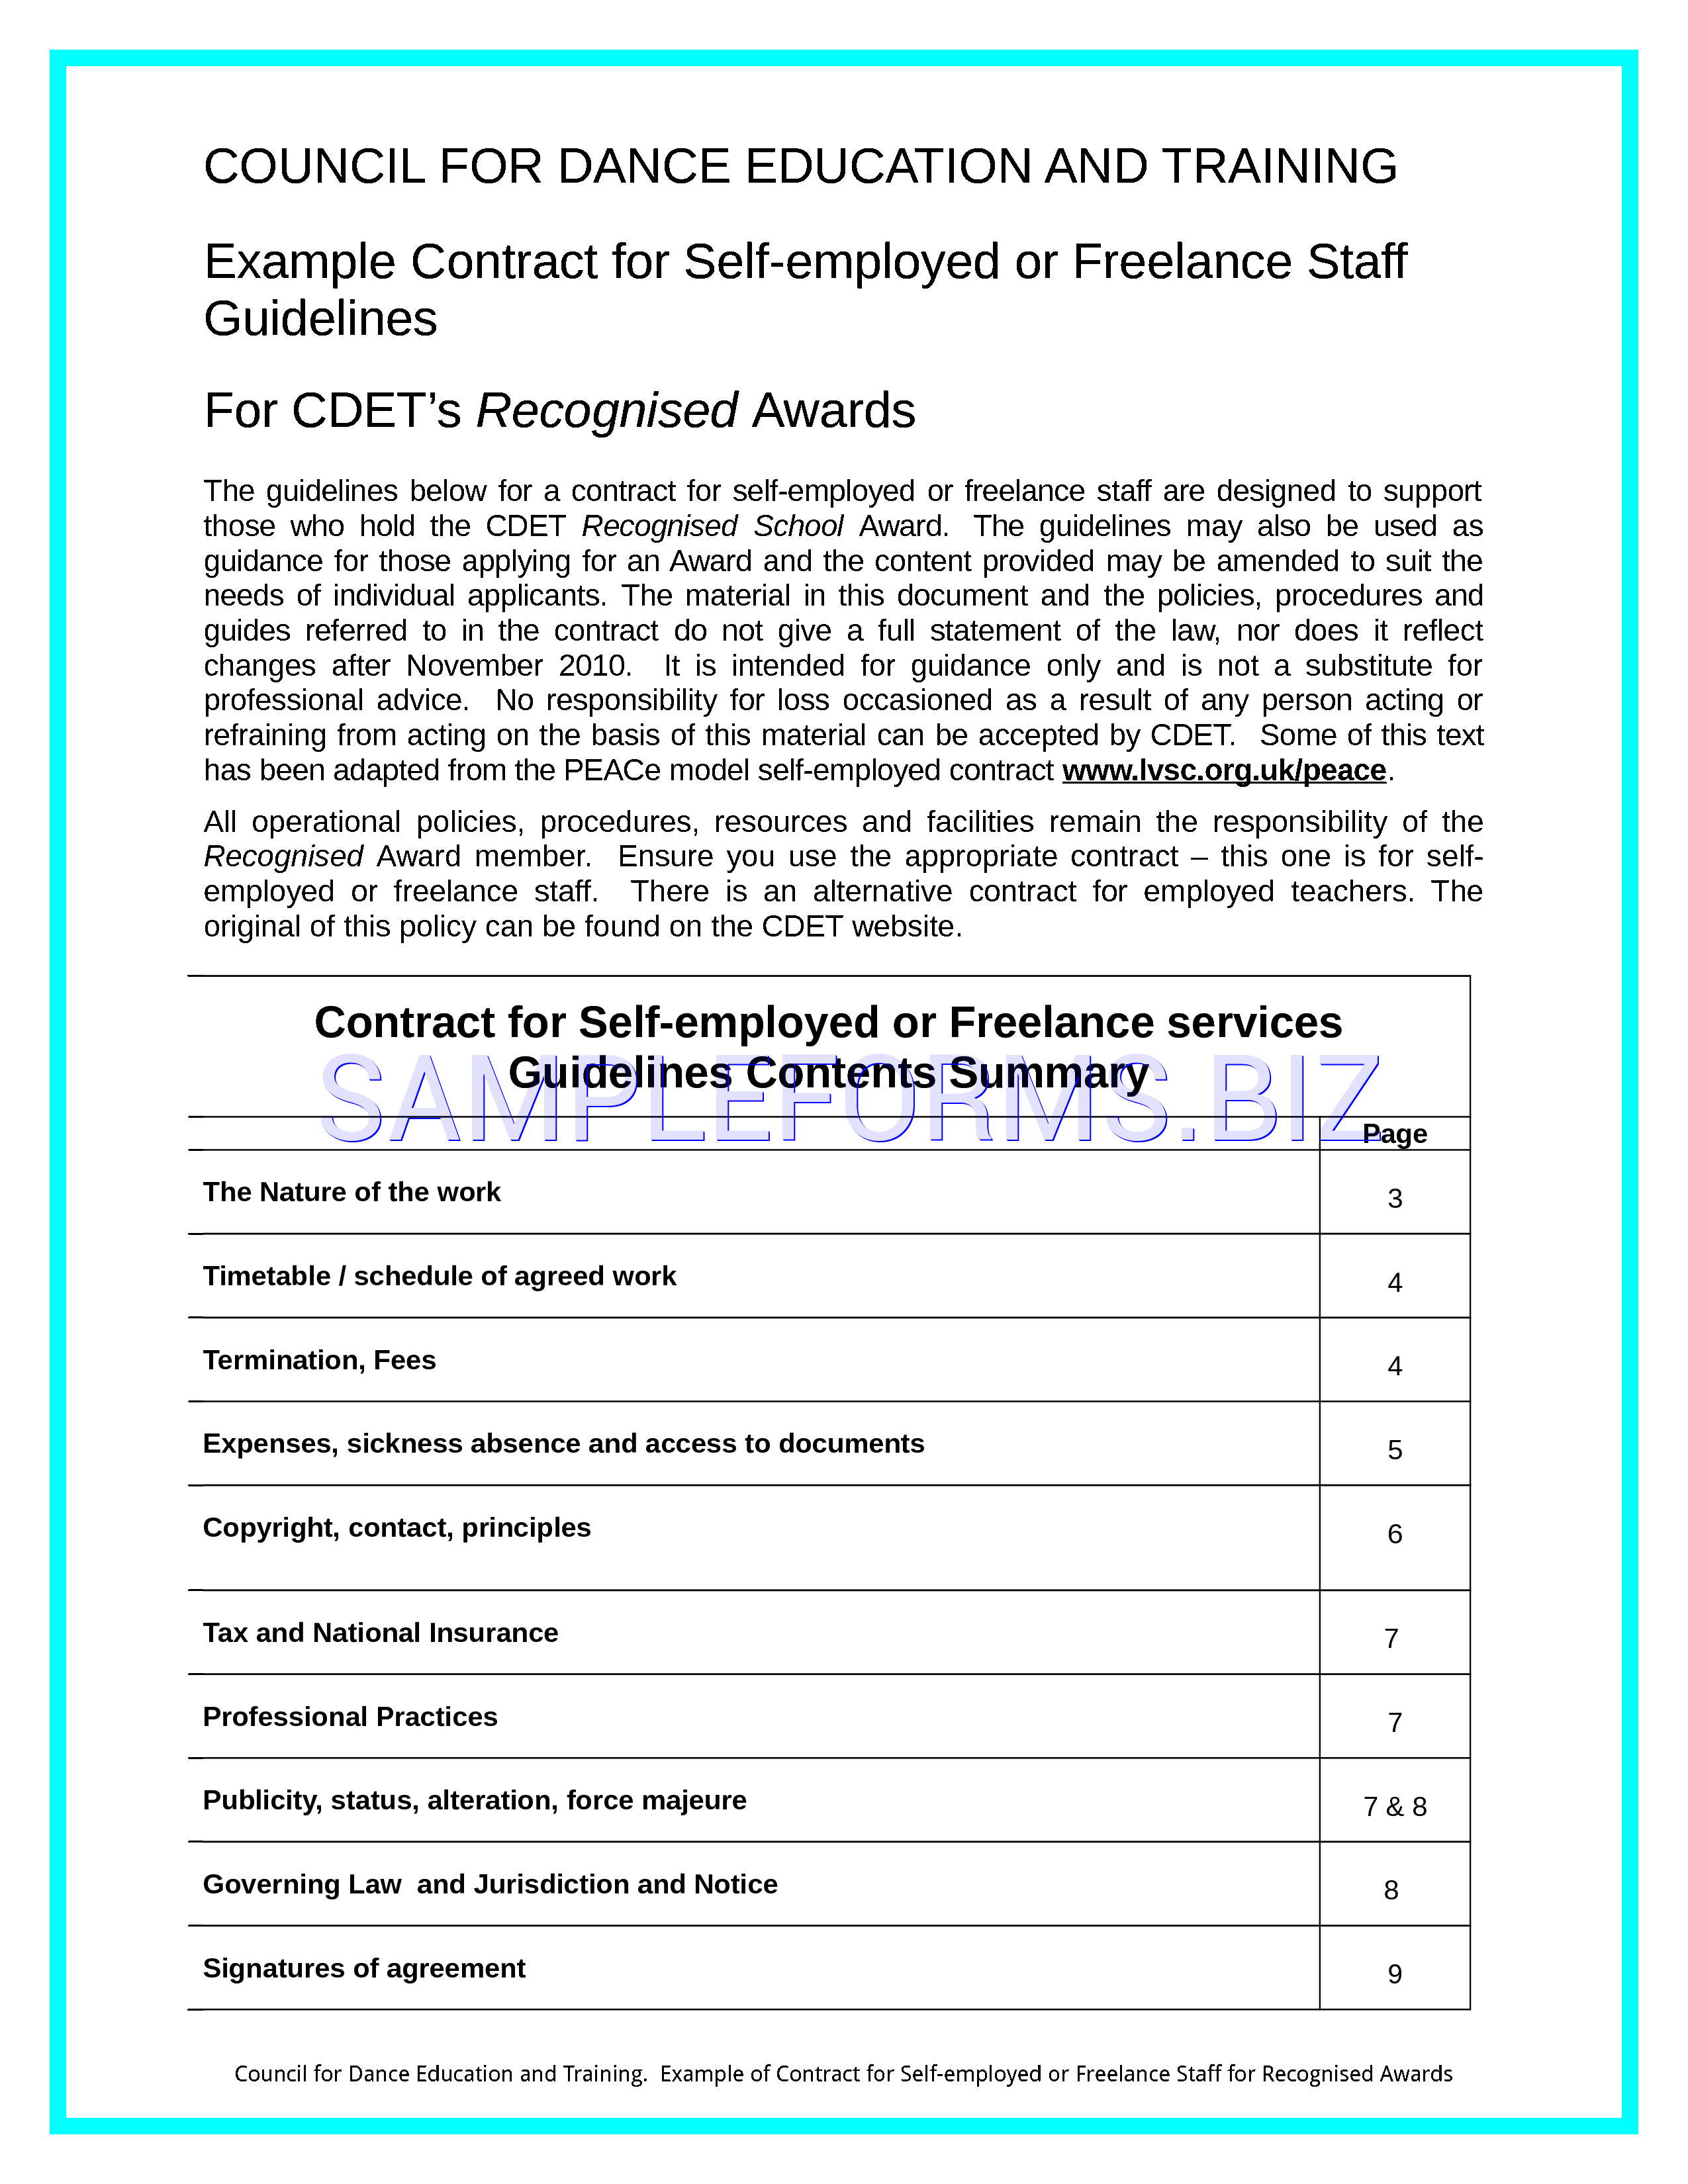 Preview free downloadable Contract for Self-Employed or Freelance Staff Guidelines in PDF (page 1)